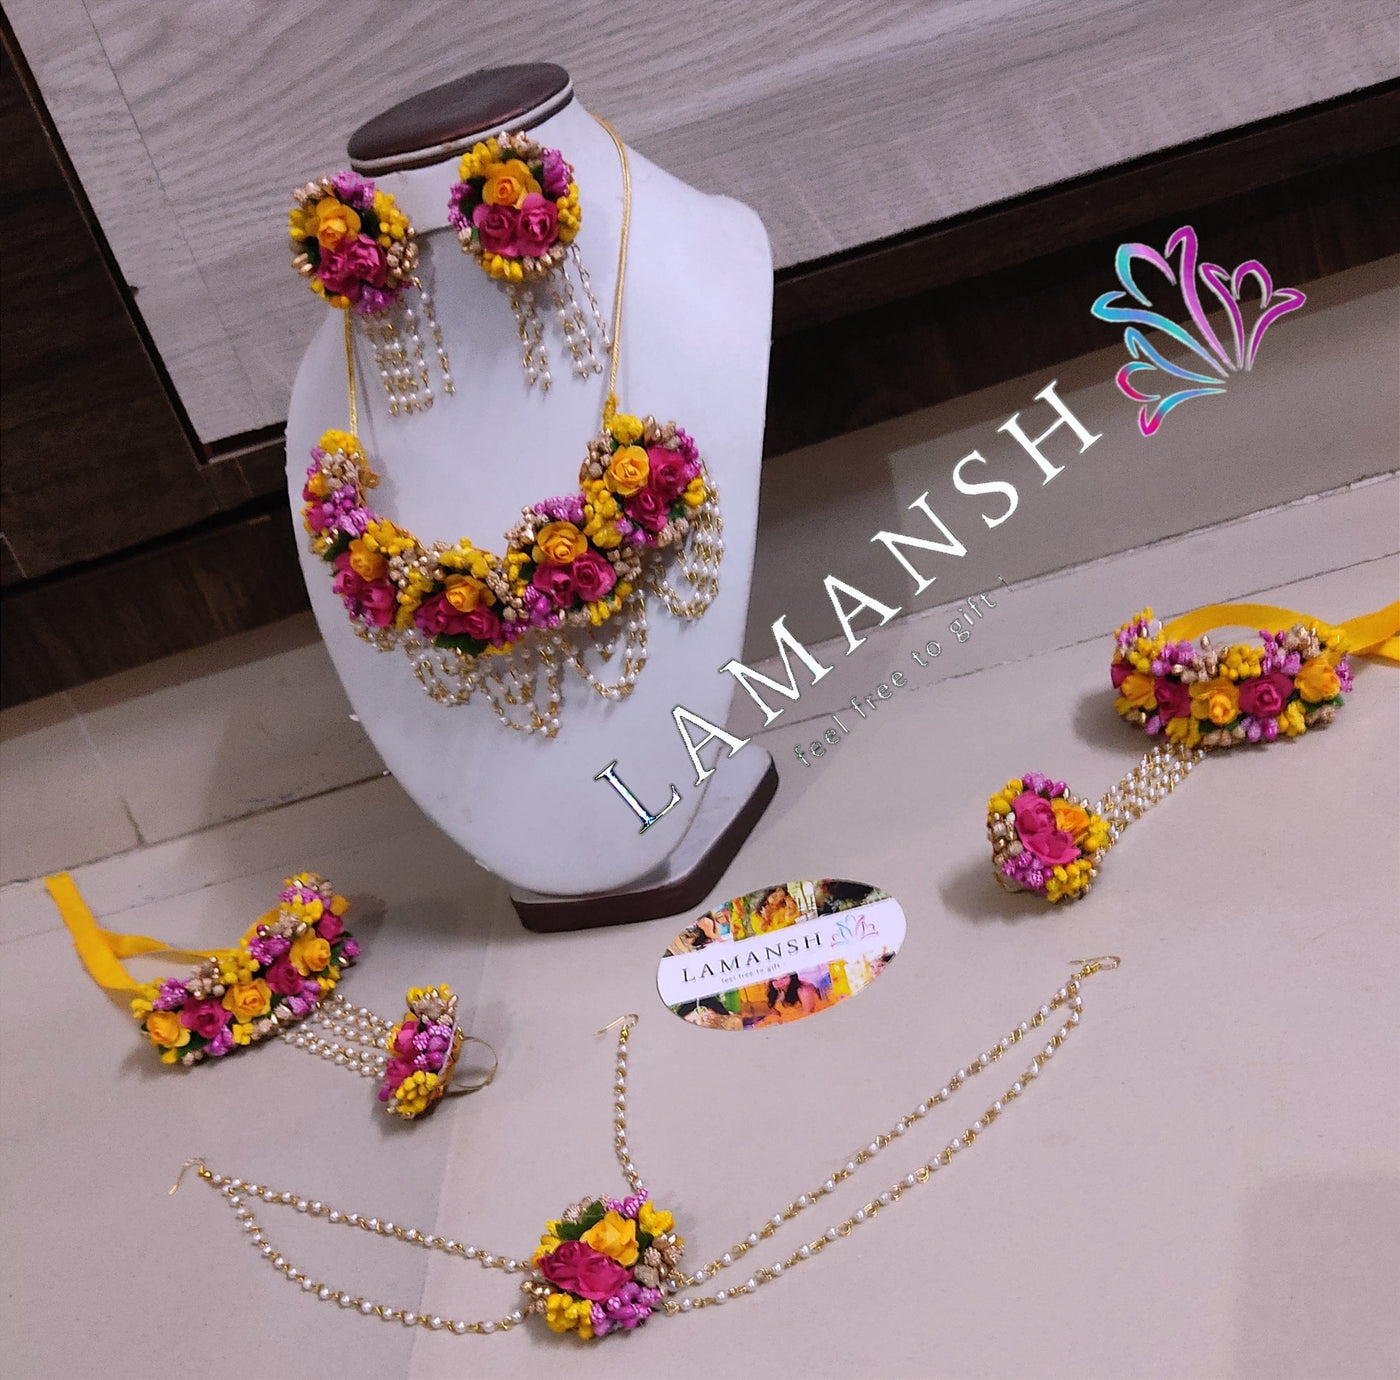 Lamansh Flower 🌺 Jewellery 1 Necklace, 2 Earrings ,1 Maangtika with side chain & 2 Bracelets Attached with Ring set / Pink-Yellow-Golden LAMANSH® Bridal 💛 Yellow-Pink-Golden Artificial Flower Jewellery set for Haldi ceremony